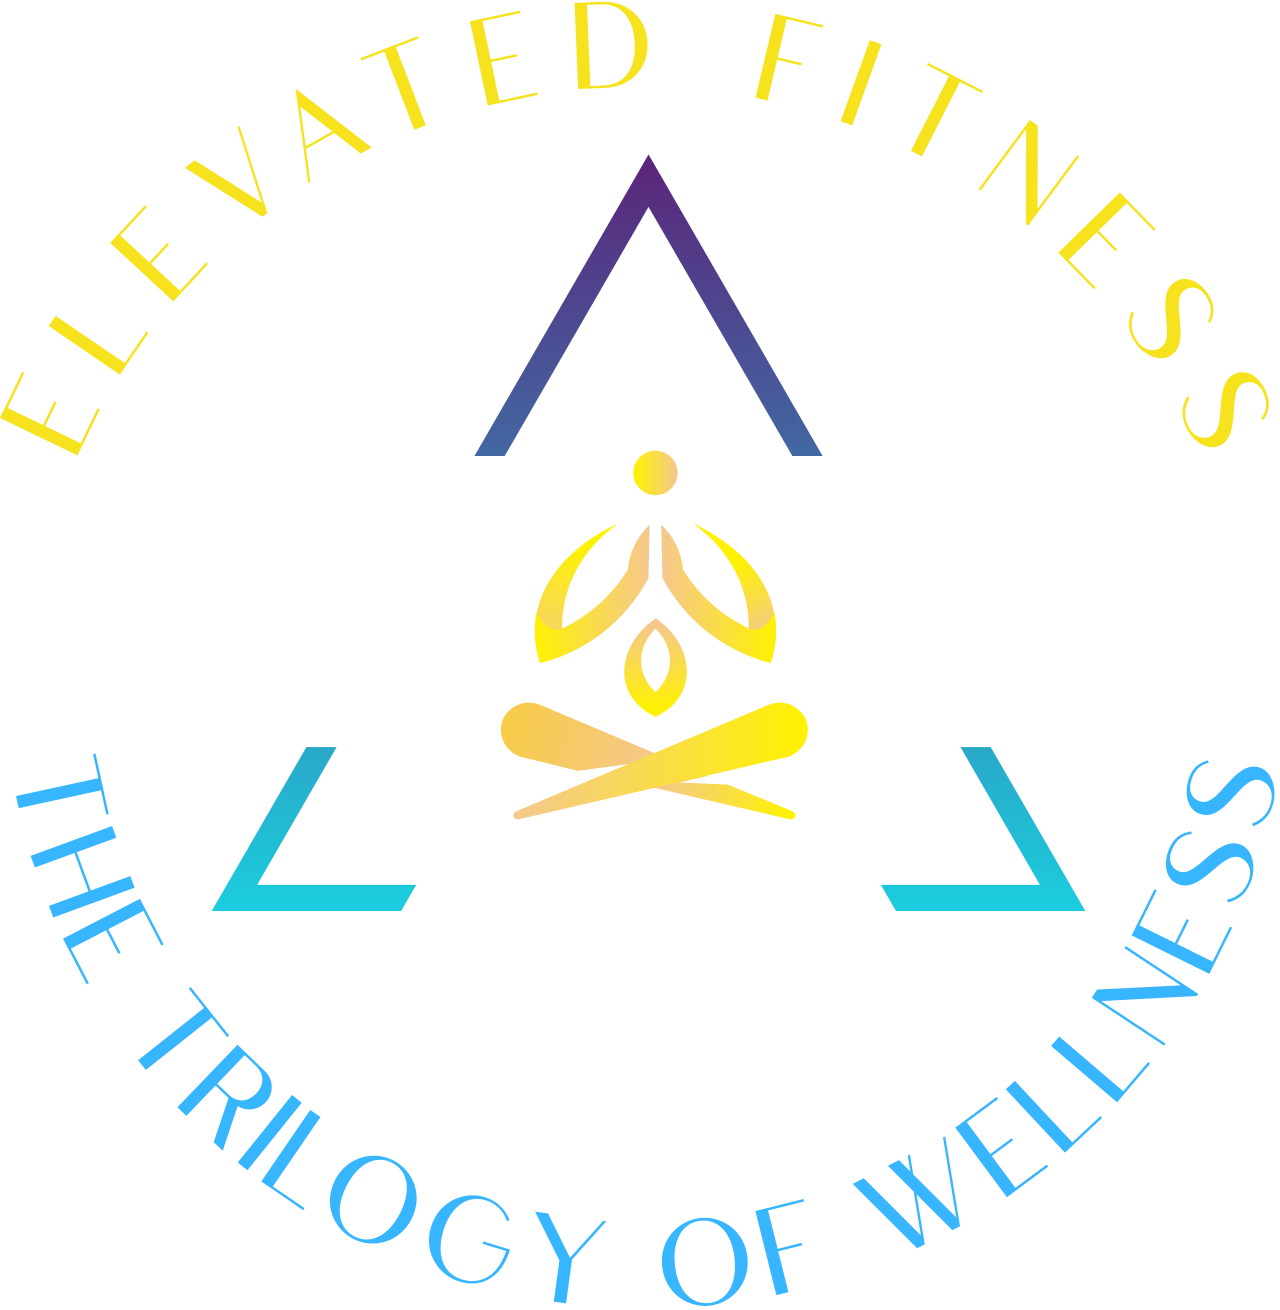 ELEVATED FITNESS's web page